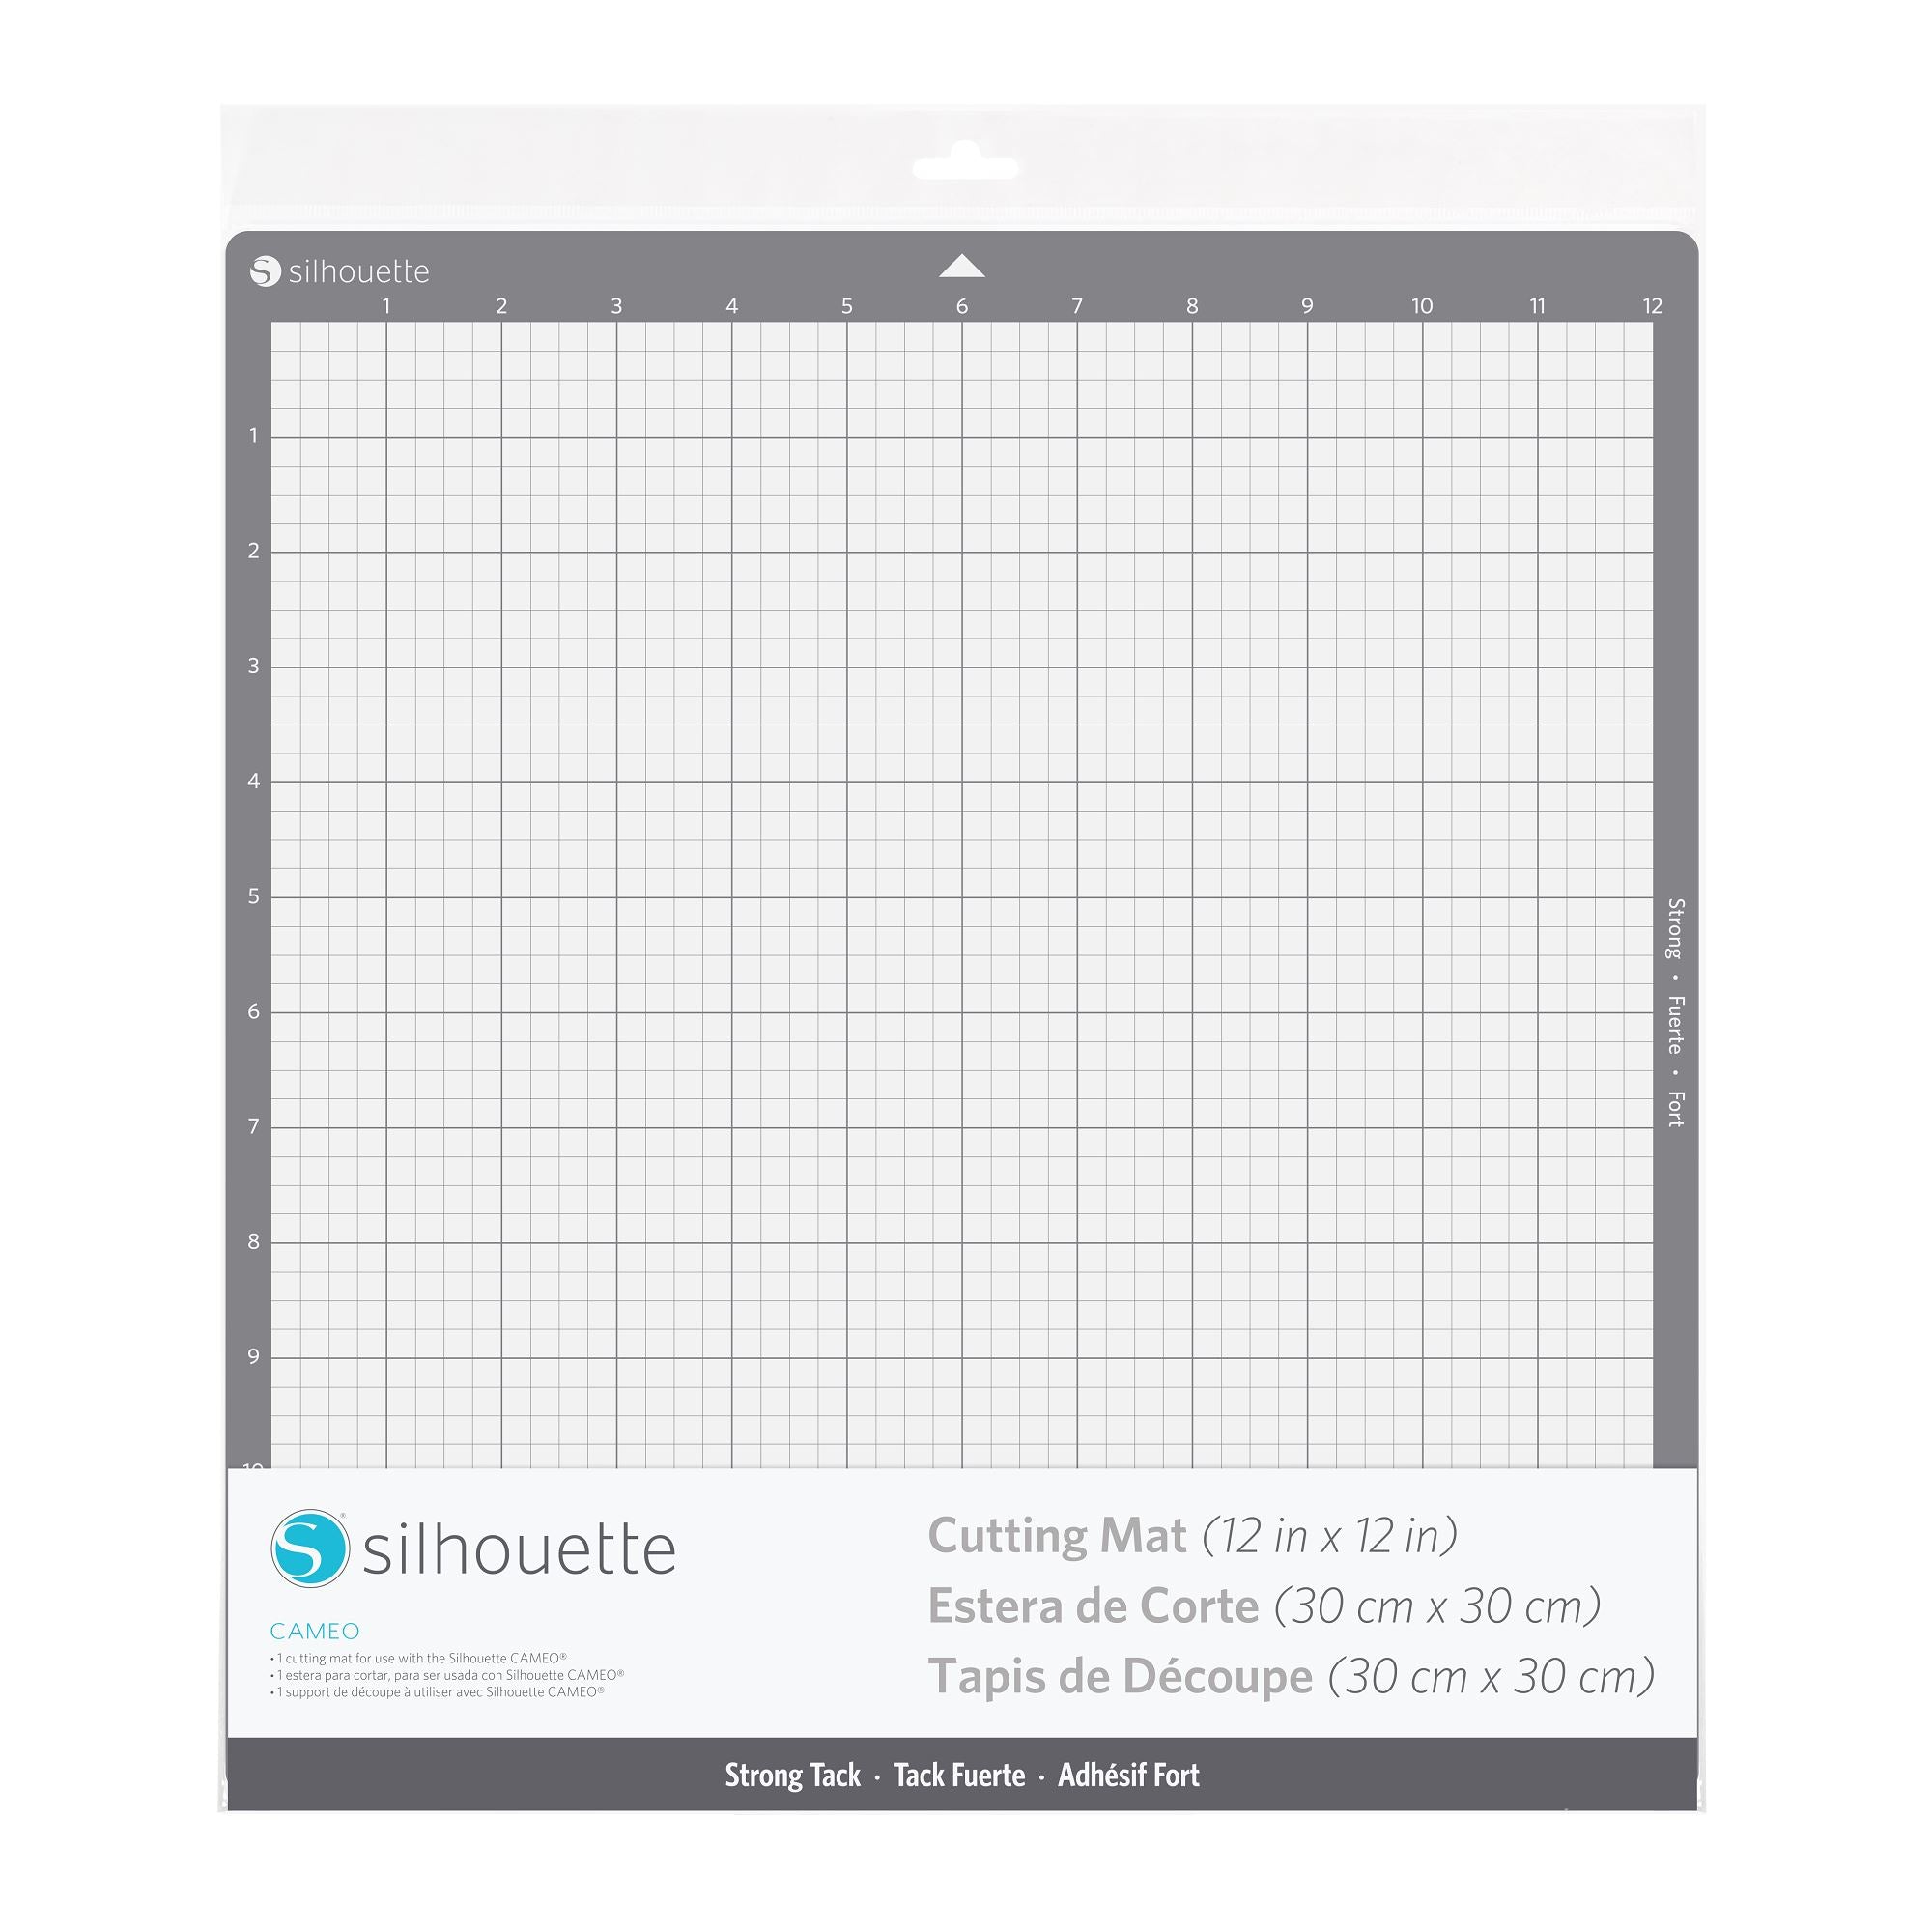 Ecraft Cutting Mat for Silhouette Cameo 3/2/1: 12X12inch Include one  StrongGrip&Three StandardGrip&One LightGrip Cutting Mat Perfect for Silhouette  Cameo Replacement for Crafts Sewing and All Arts Multicolor for Cameo 12X12  (5 pack) Variety